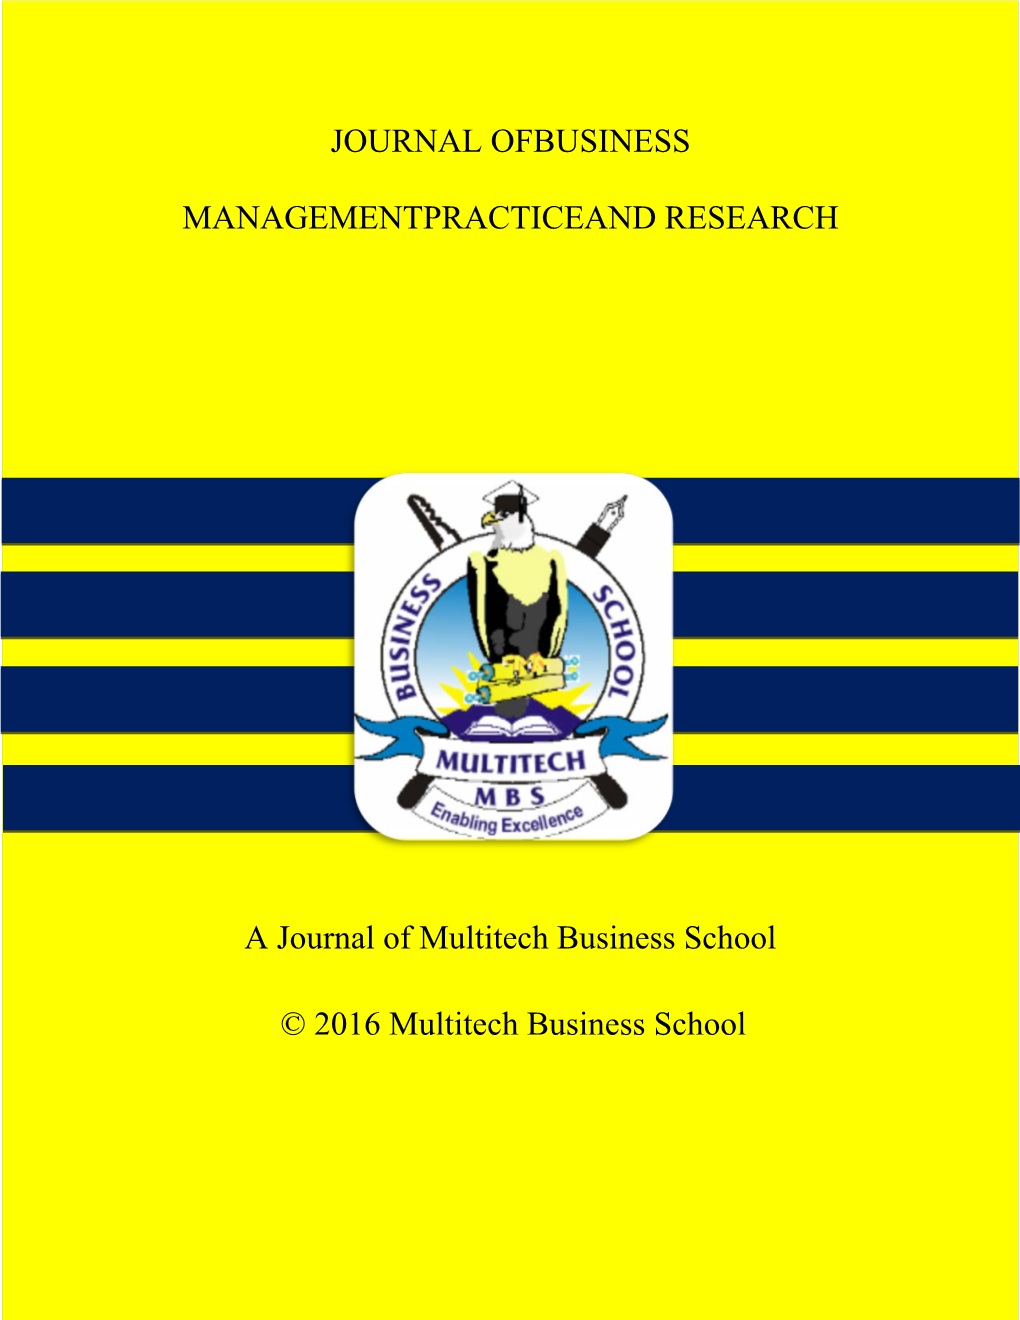 Journal of Business Management Practice and Research (JBMPR) Vol. 1 Issue 1 2016. ISBN: 978-9970-9423-0-5